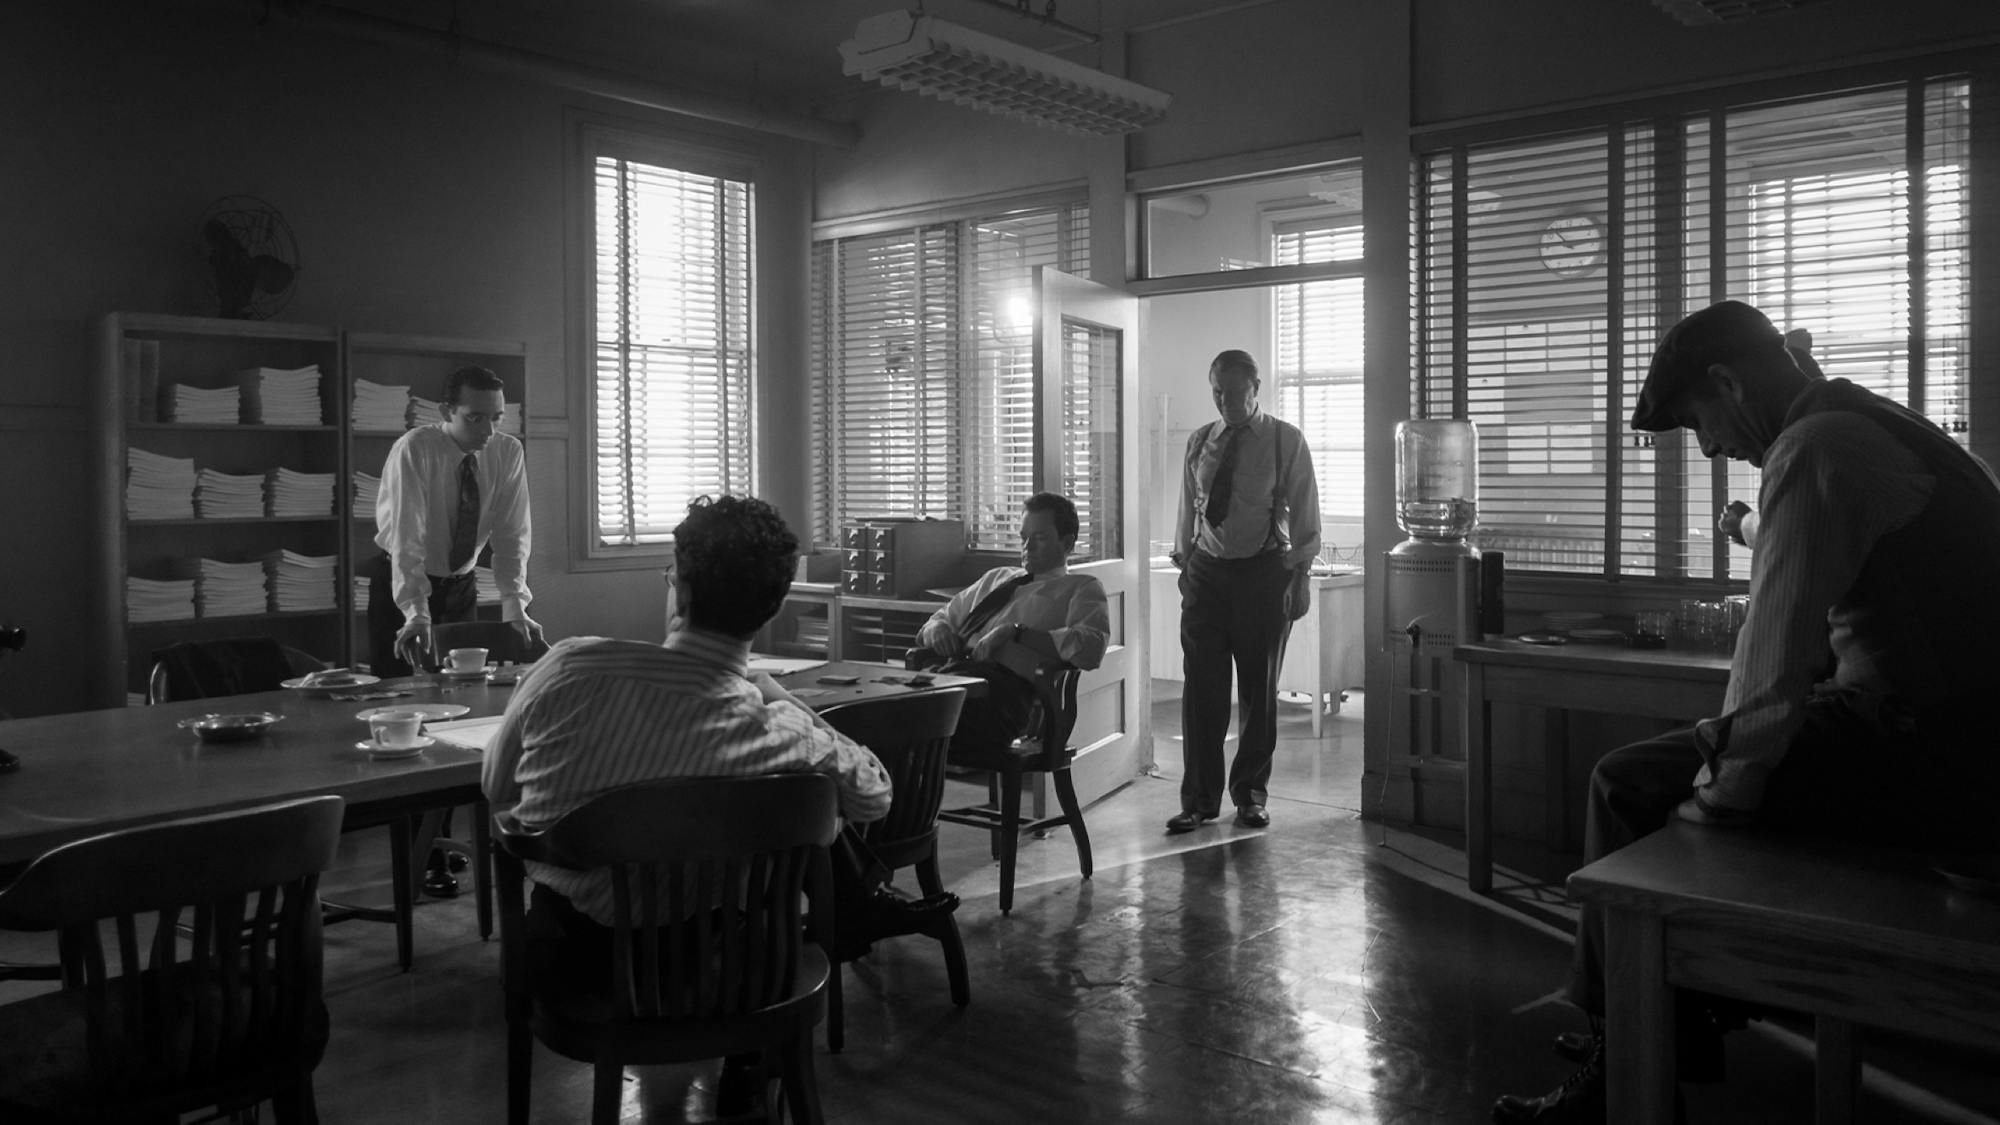  Irving Thalberg’s office in Mank. Venetian blinds filter the light into shafts. Men are perched throughout the office, some around a large conference table. Mank stands posed in a doorway. 